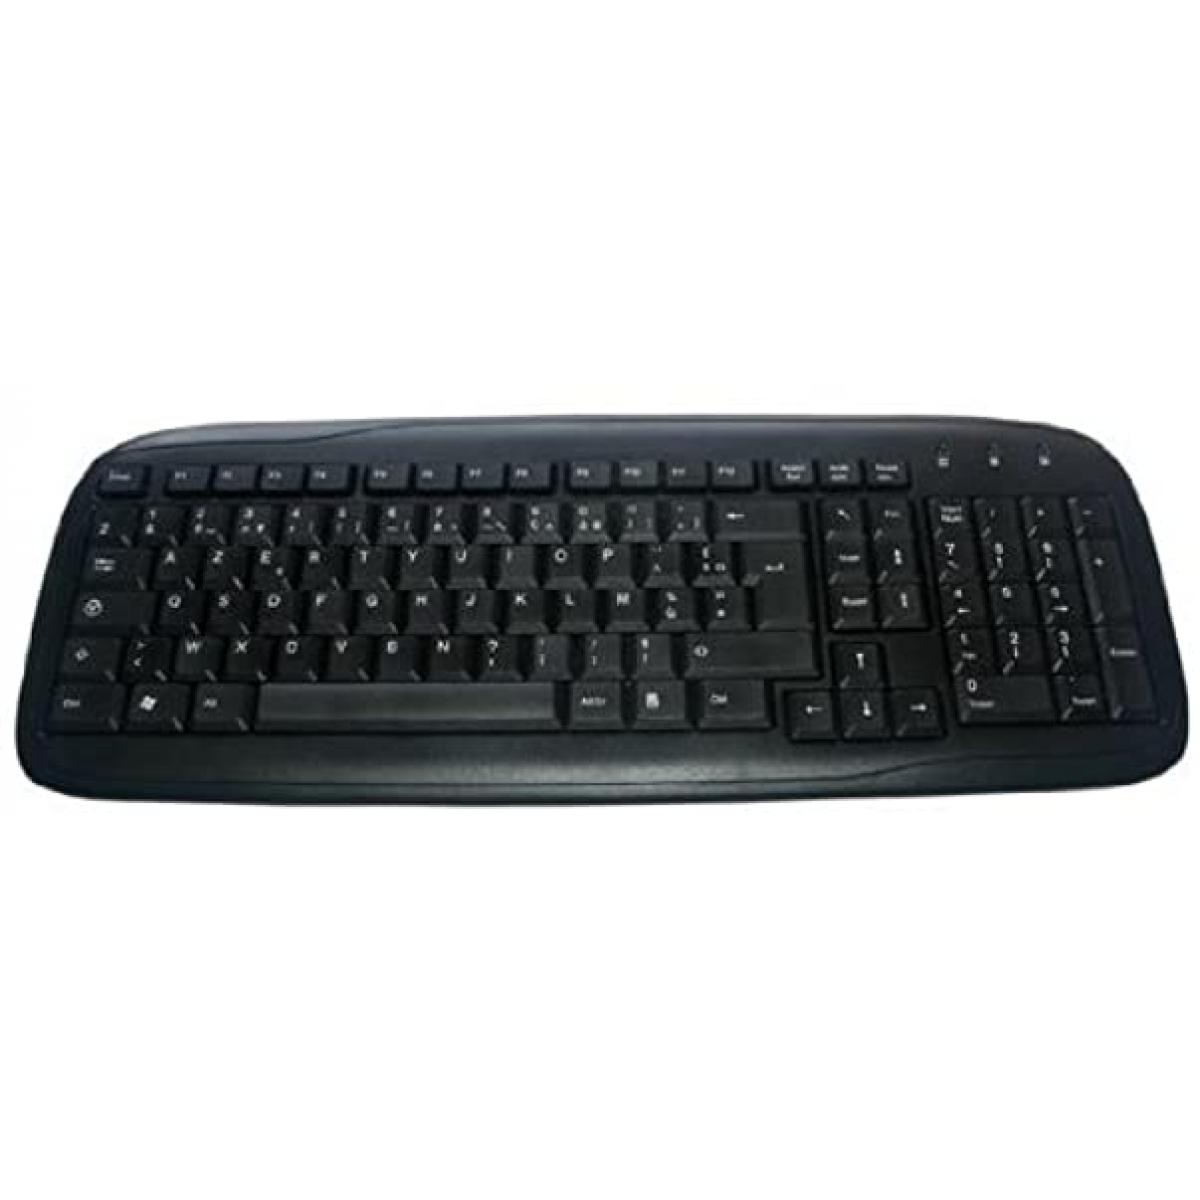 Mcl - MCL MCL Clavier USB filaire Azerty touches MCL Clavier USB filaire Azerty touches silencieuses - Clavier